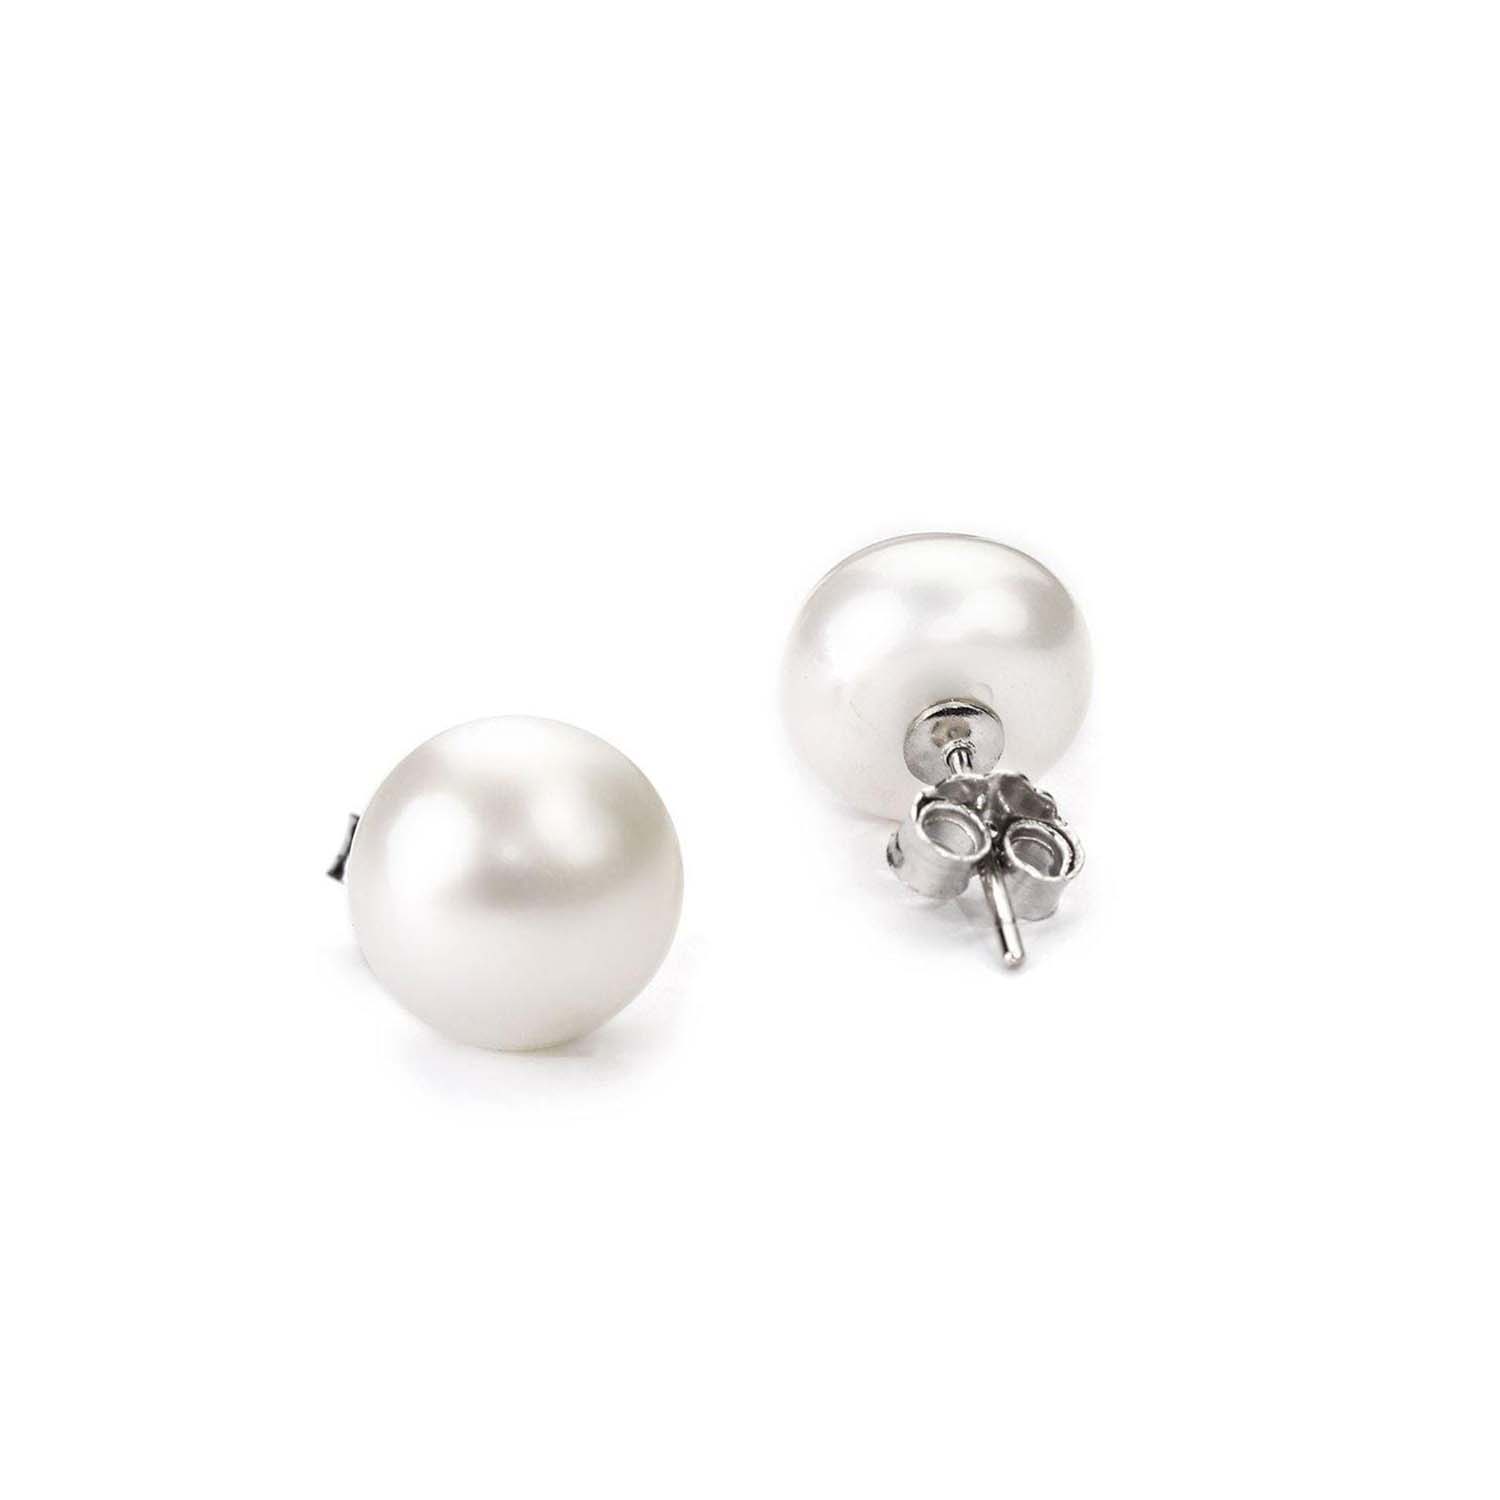 Classic Everyday 925 Silver Earrings Set